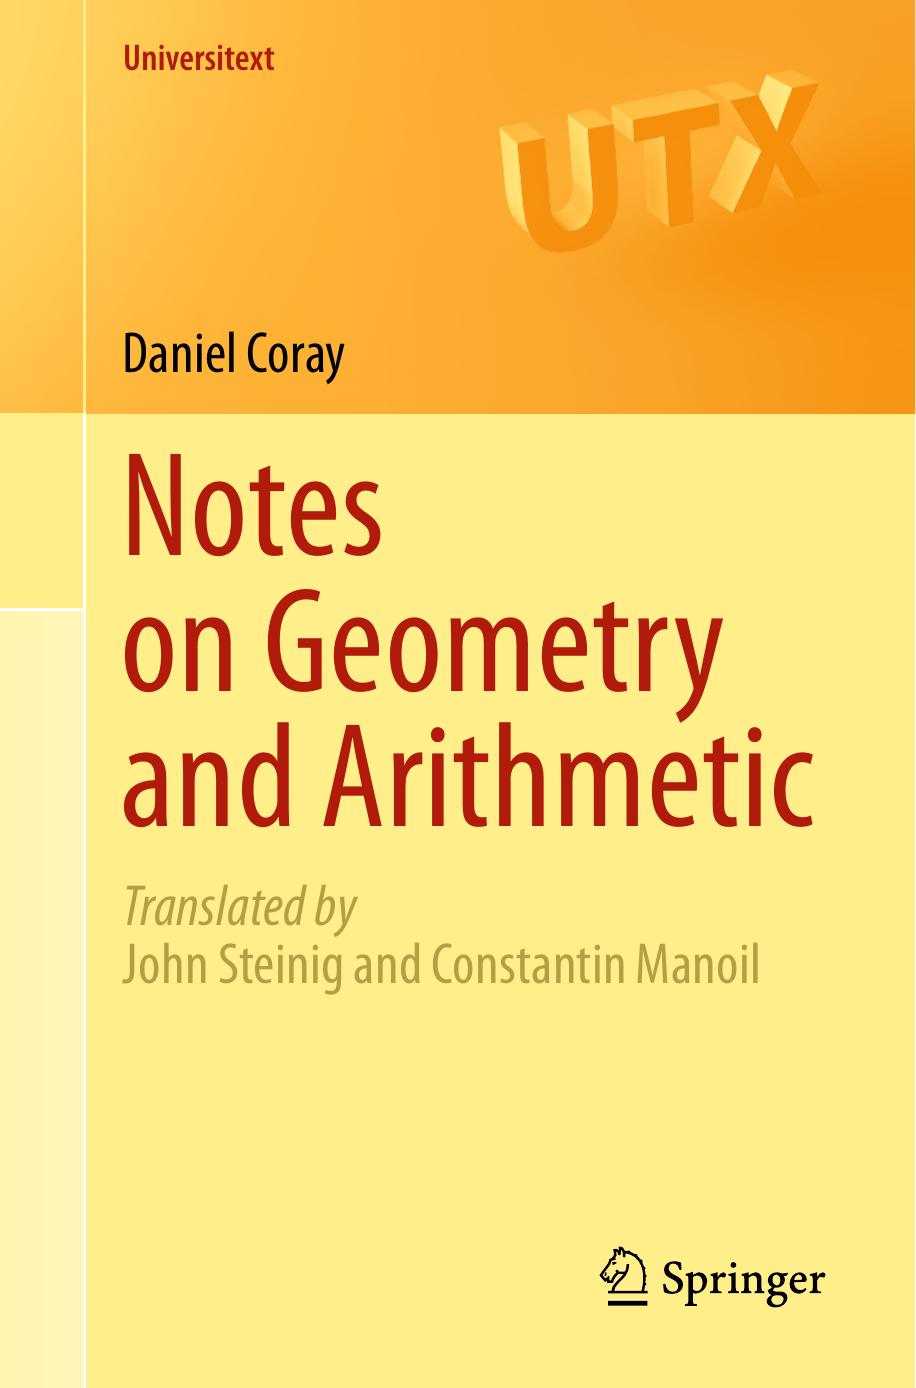 Notes on Geometry and Arithmetic by Daniel Coray